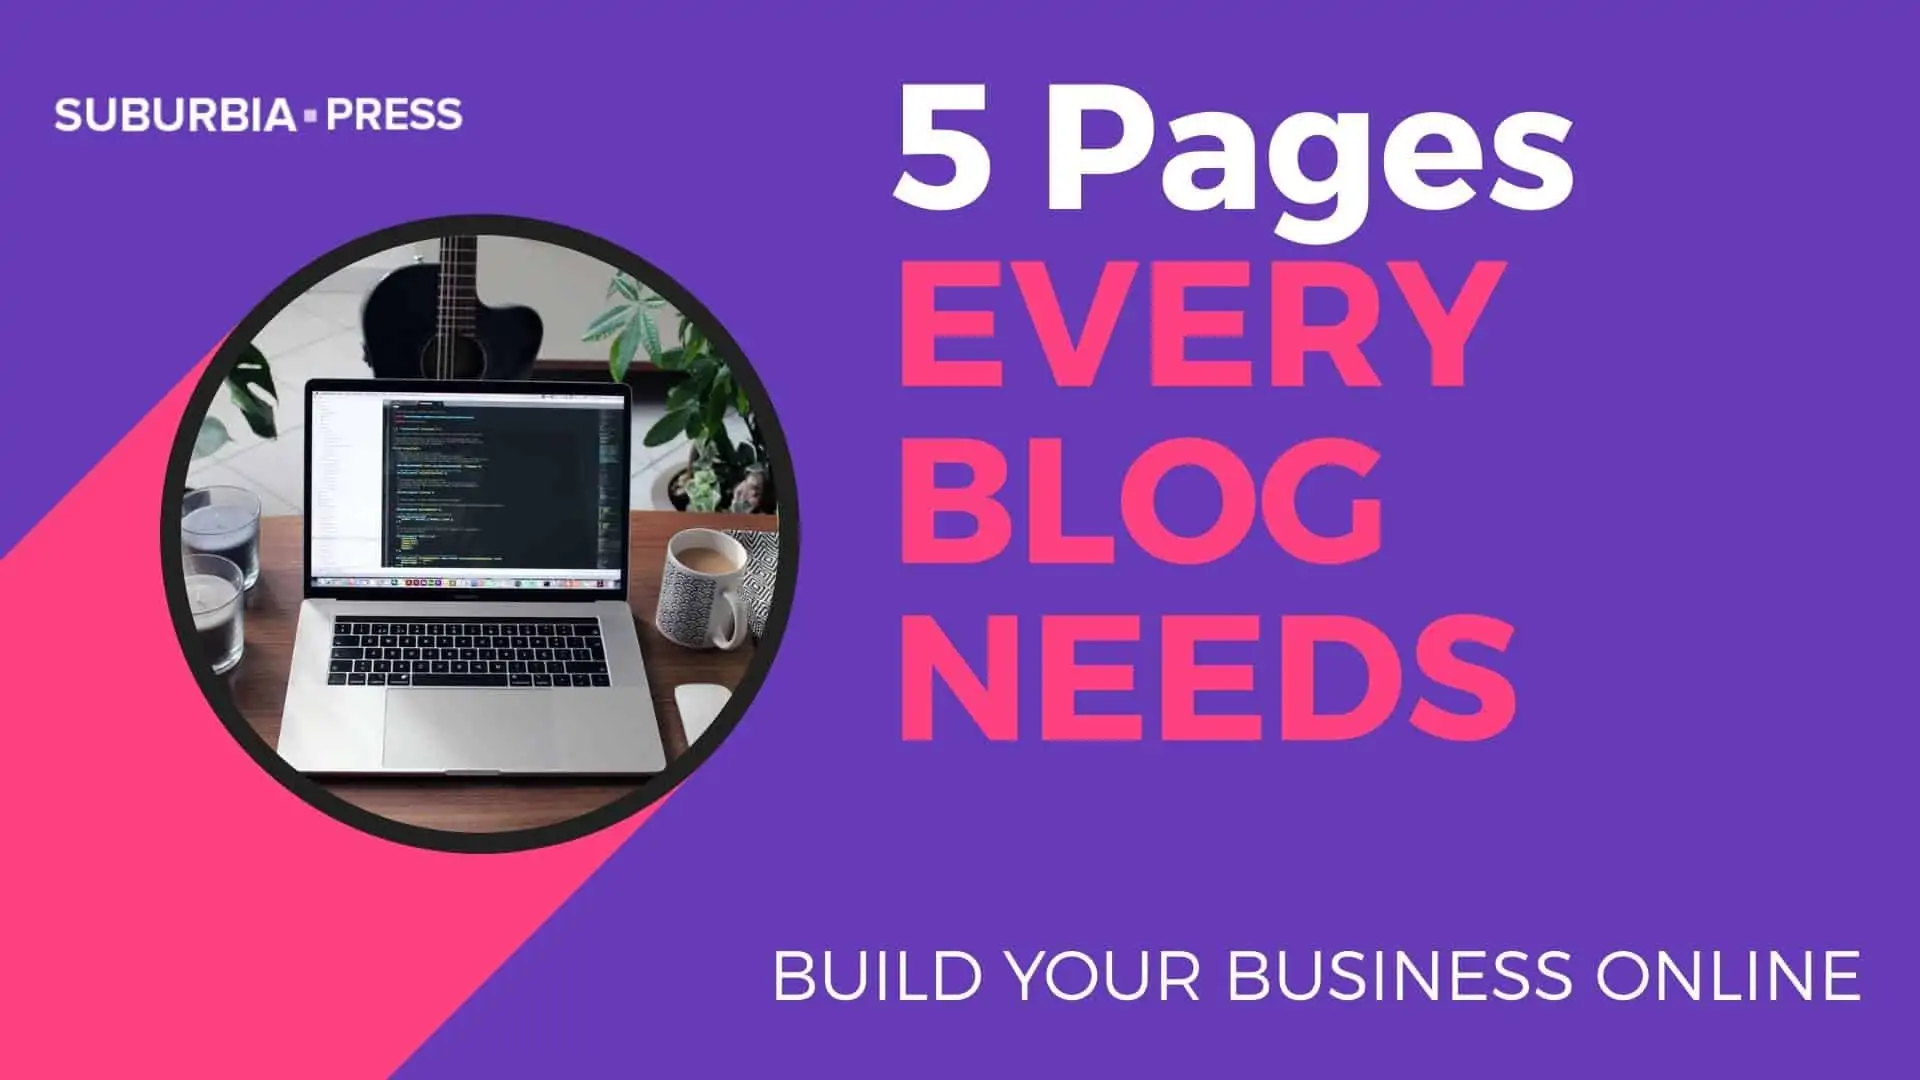 5 Important Pages Every Blog Needs